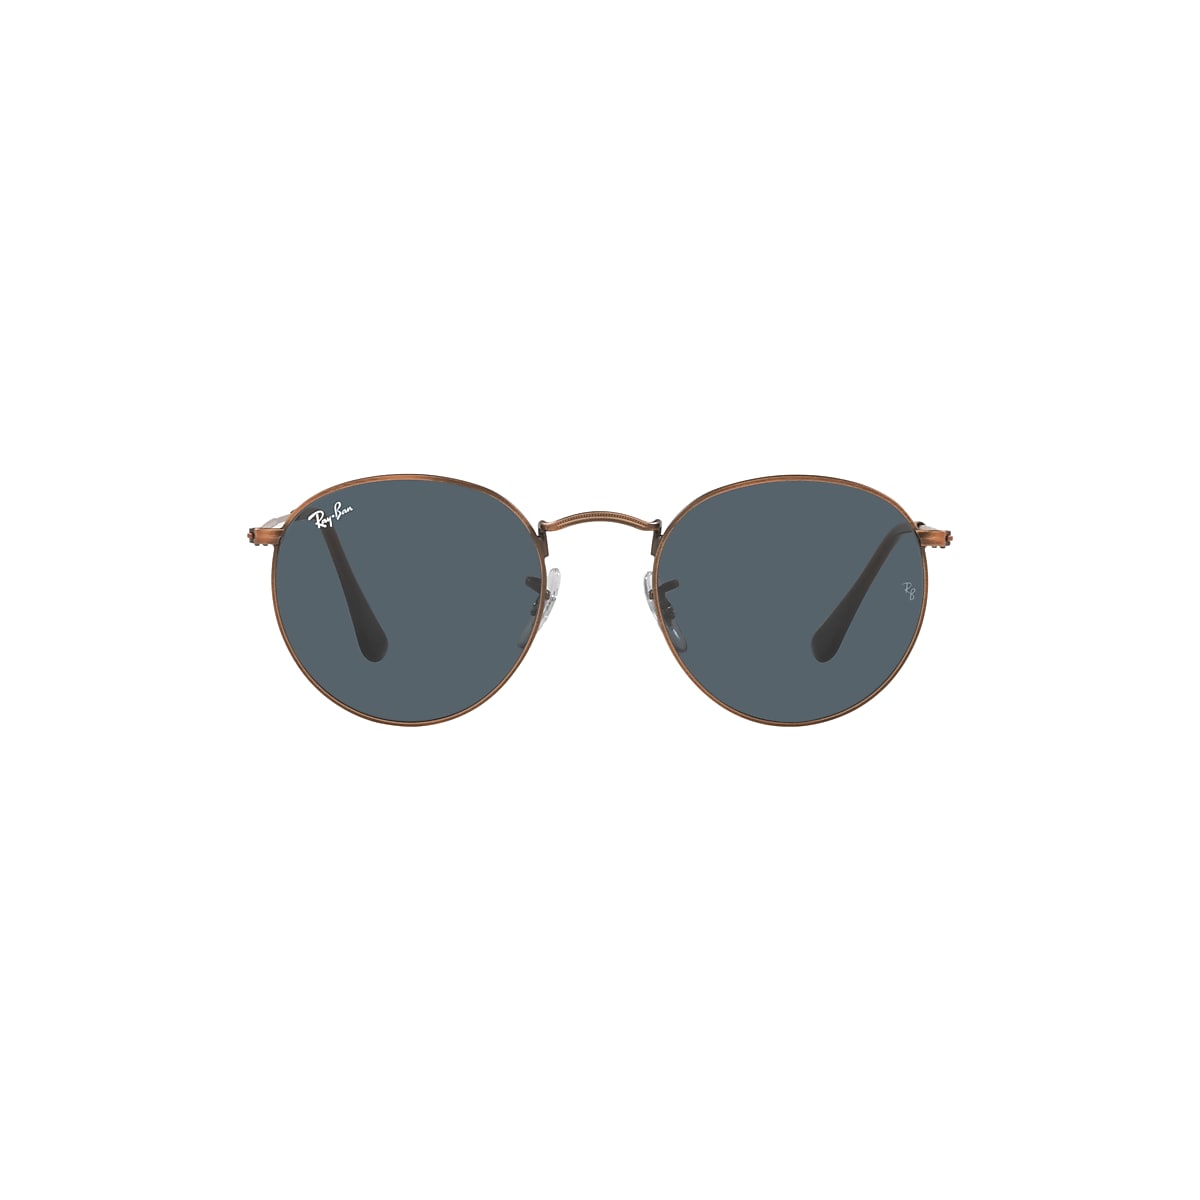 ROUND METAL ANTIQUED Sunglasses in Bronze-Copper and Blue - RB3447